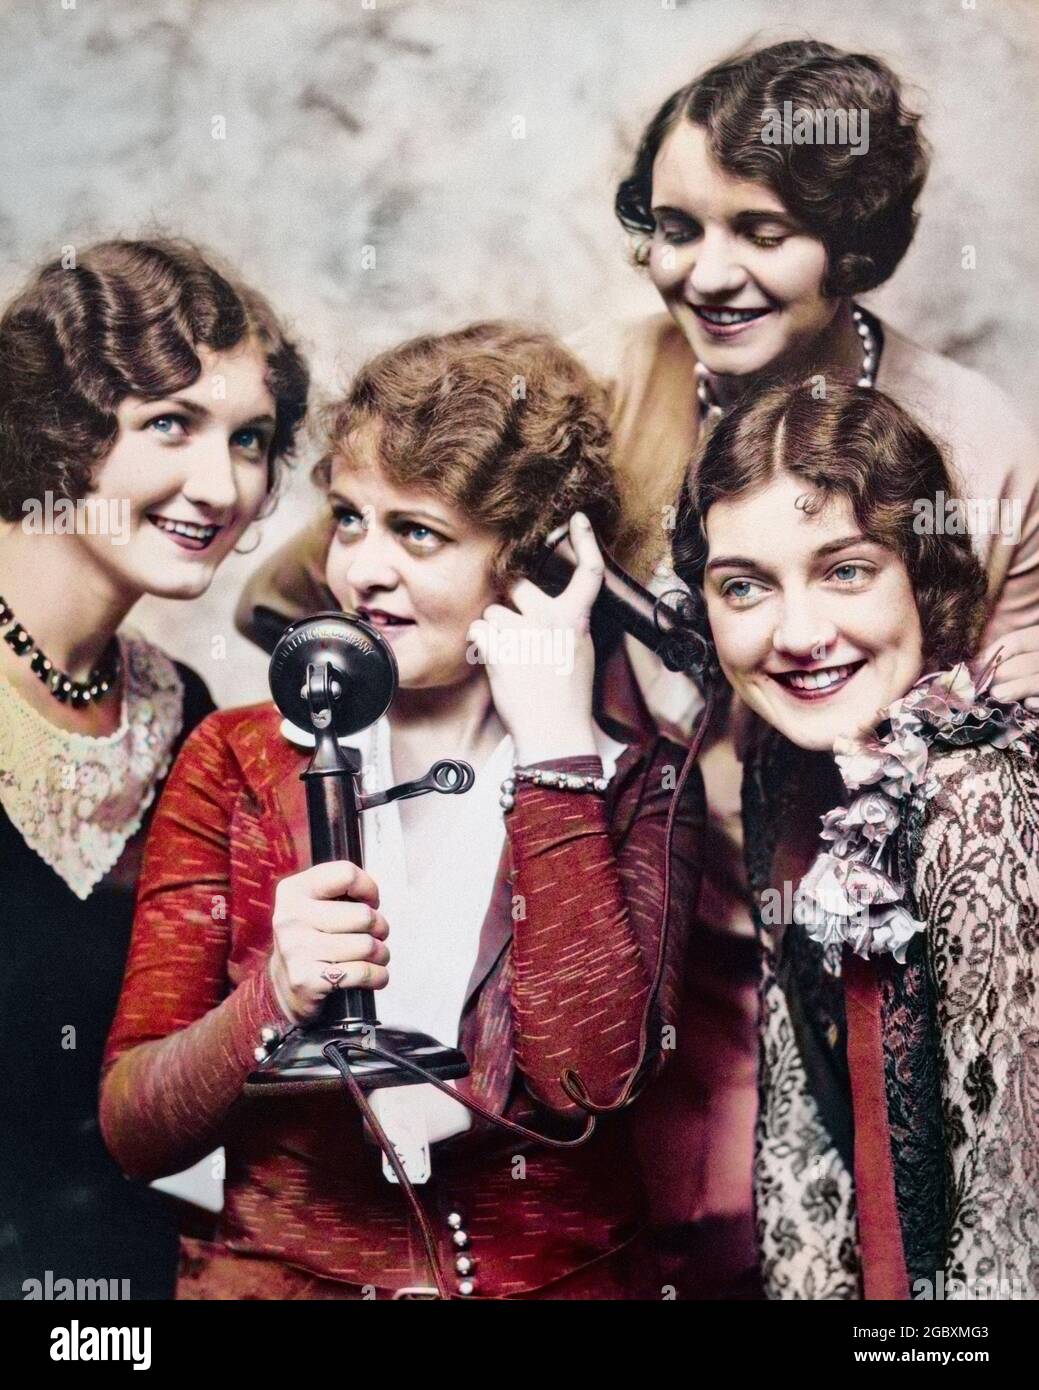 1920s GROUP OF FOUR WOMEN GATHERED AROUND CANDLESTICK PHONE - t2238c HAR001 HARS OLD TIME BUSY NOSTALGIA OLD FASHION SISTER 1 MANY STYLE WELCOME COMMUNICATION CHATTING FRIEND YOUNG ADULT TEAMWORK COMPETITION INFORMATION LIFESTYLE FEMALES VERTICAL PORTRAITS GROWNUP HOME LIFE COMMUNICATING FRIENDSHIP SPEAK SIBLINGS CHAT SISTERS CANDLESTICK RELEASES BUZZ DREAMS TELEPHONING HEAD AND SHOULDERS CHATTER STRATEGY NETWORKING EXCITEMENT BUSYBODY CANDLESTICK PHONE TELLING MARCEL WAVE PHONES SIBLING SMILES STORIES CONNECTION TELEPHONES FRIENDLY MEMBERS PHONING STYLING STYLISH TATTLER HEARSAY COMMUNICATE Stock Photo